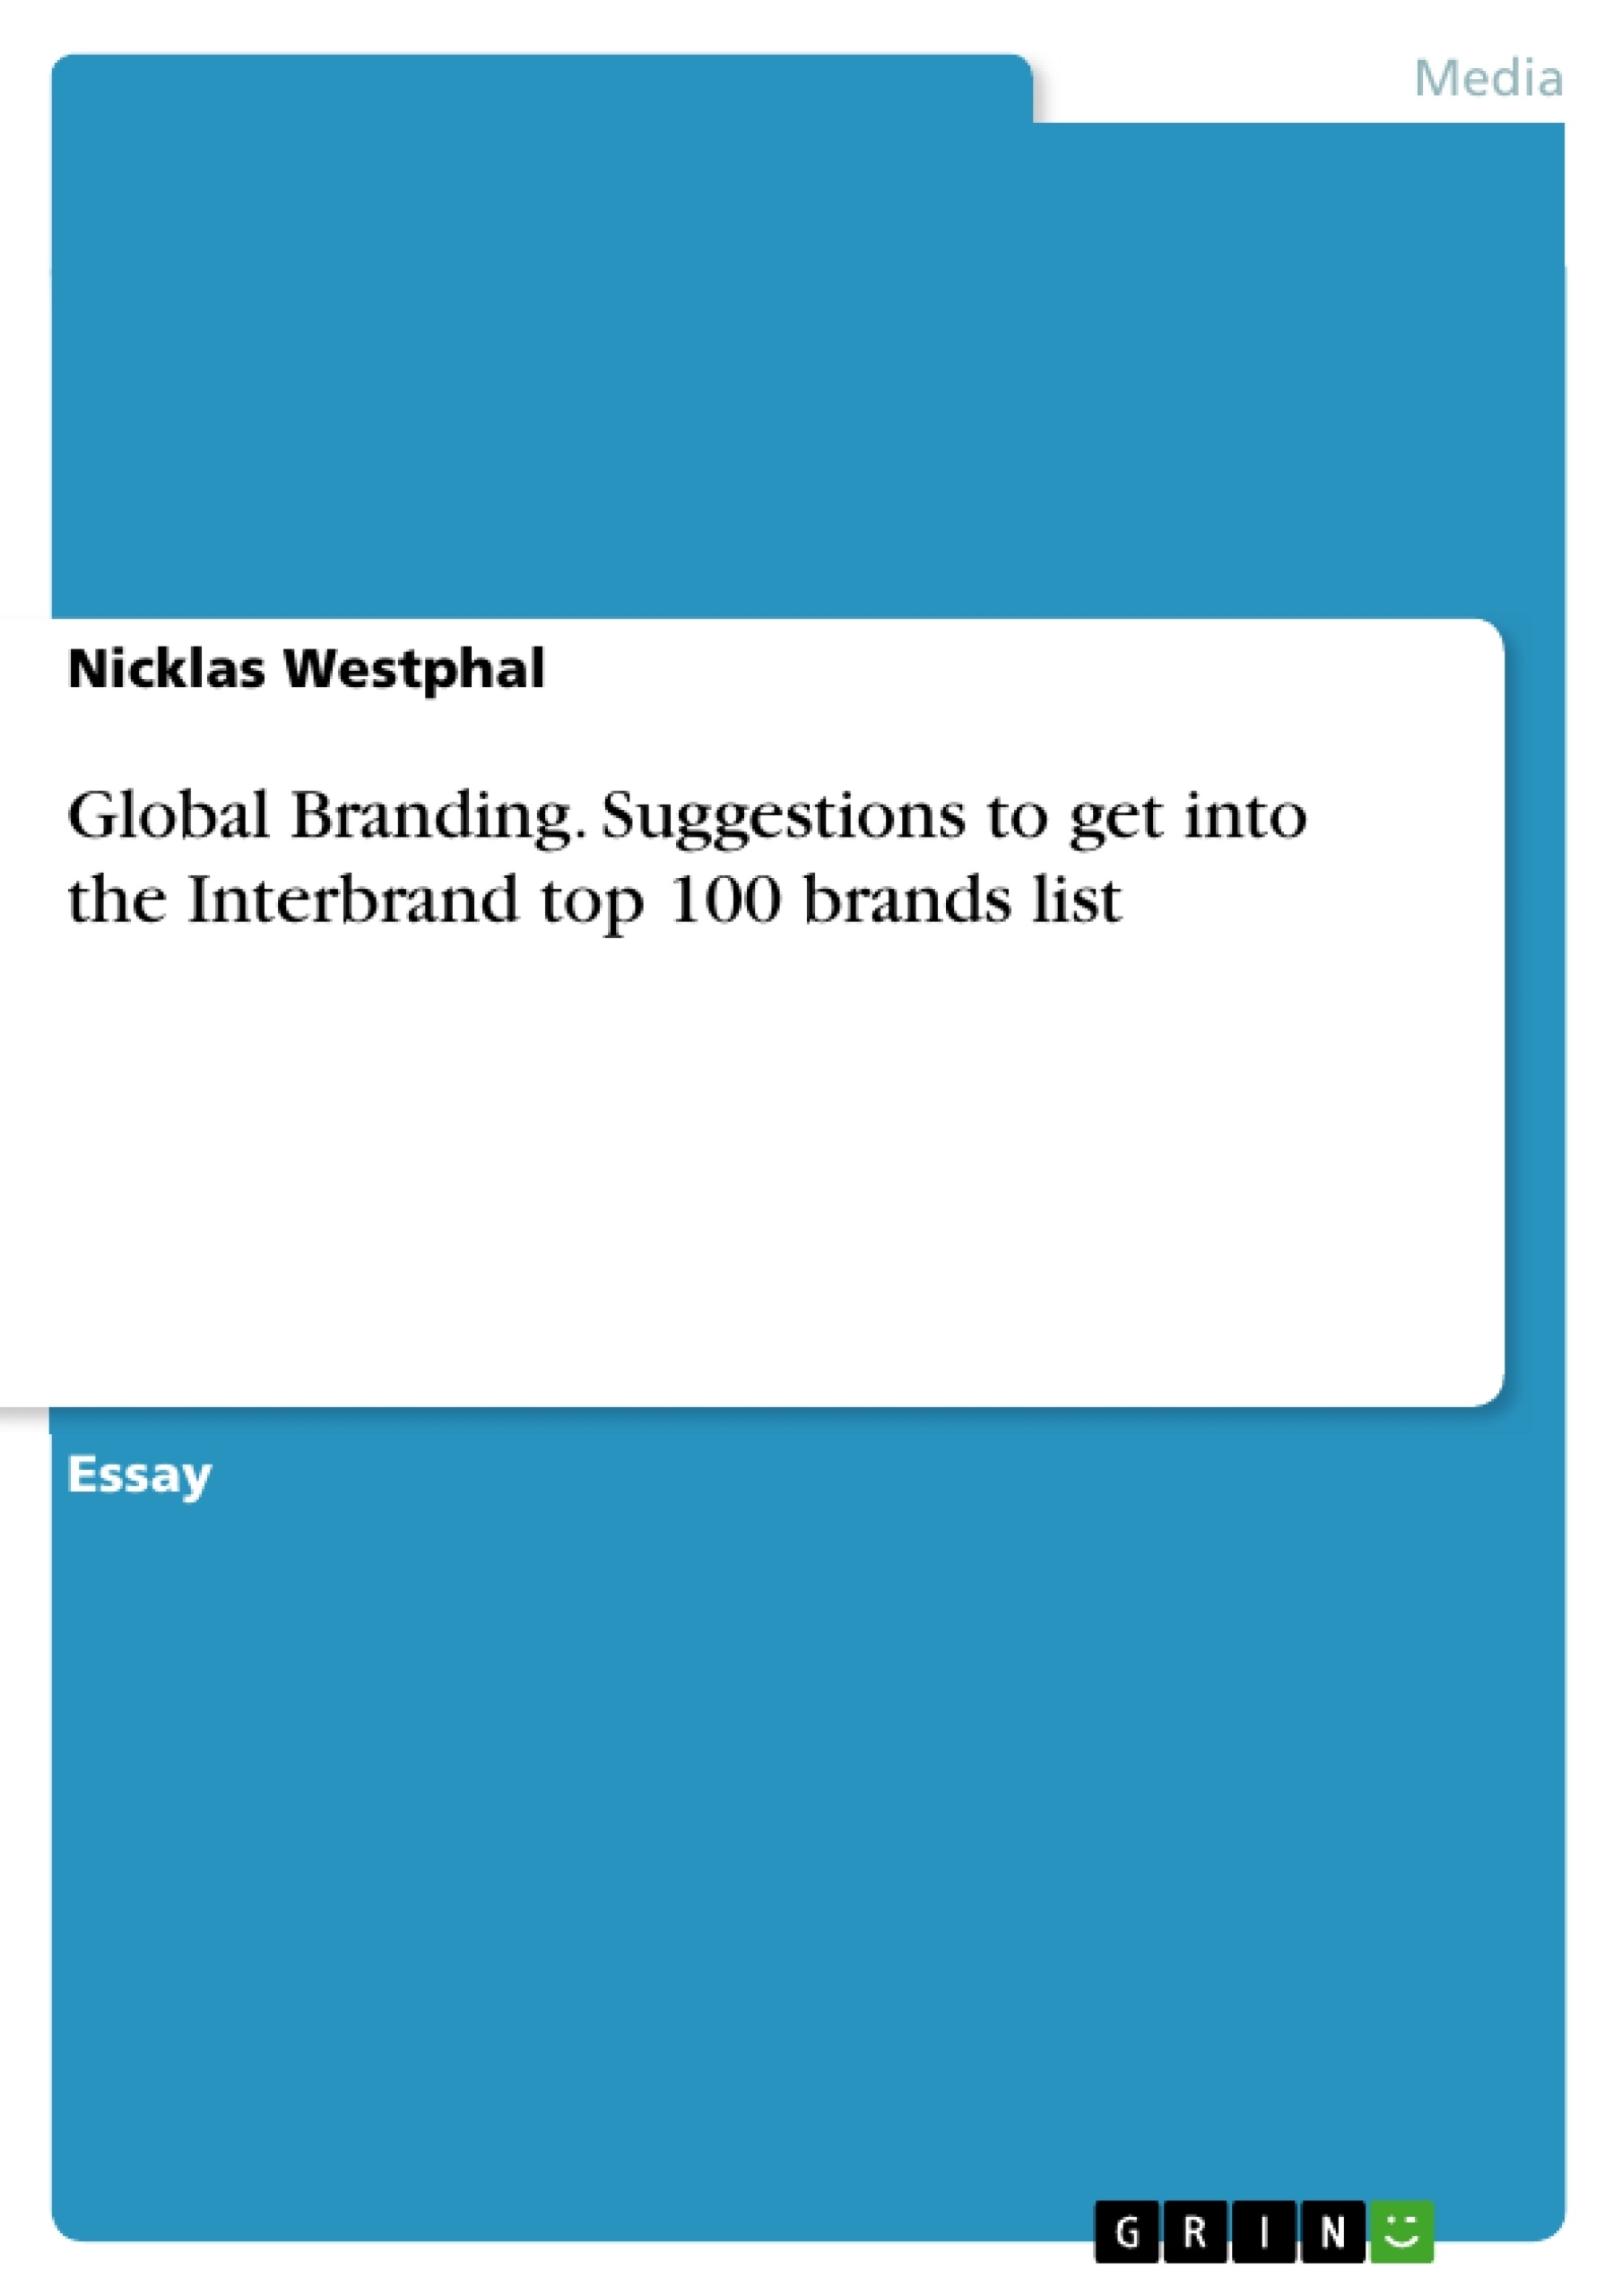 Título: Global Branding. Suggestions to get into the Interbrand top 100 brands list